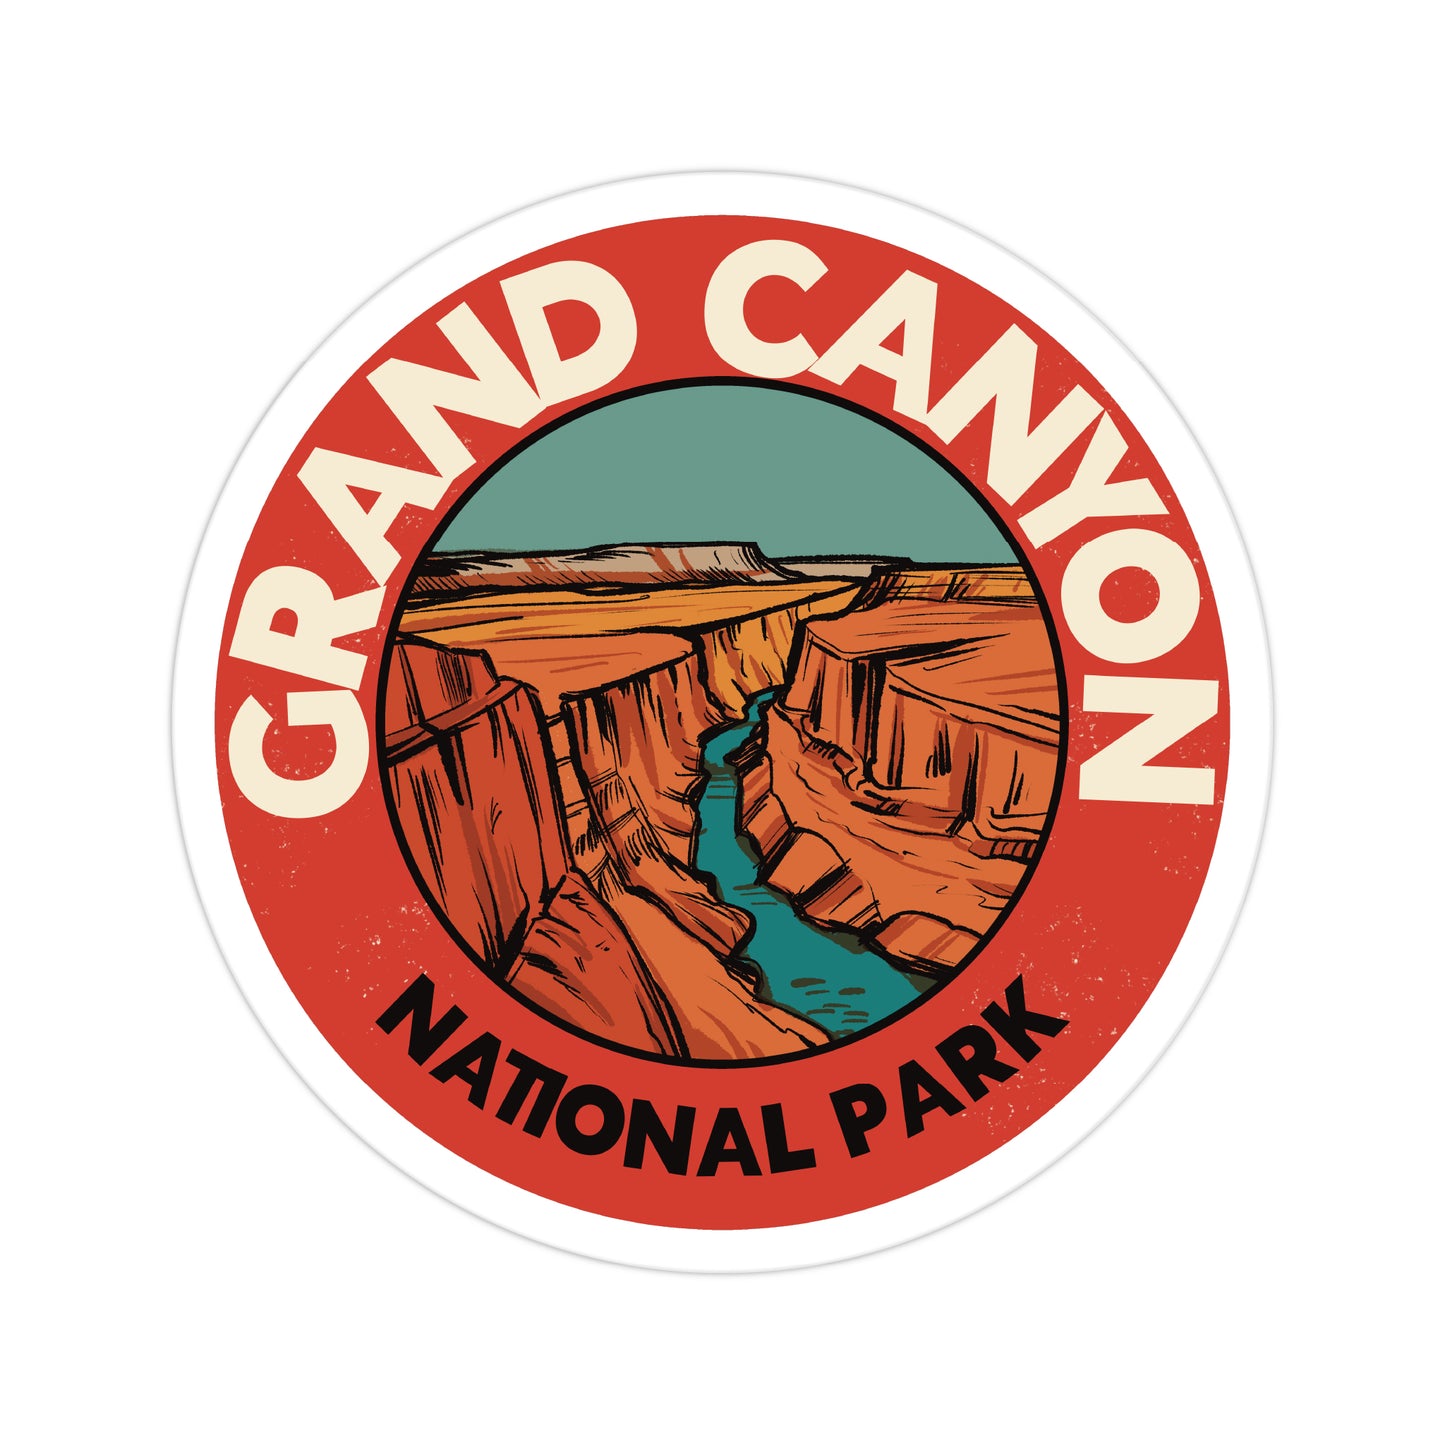 A sticker of Grand Canyon National Park